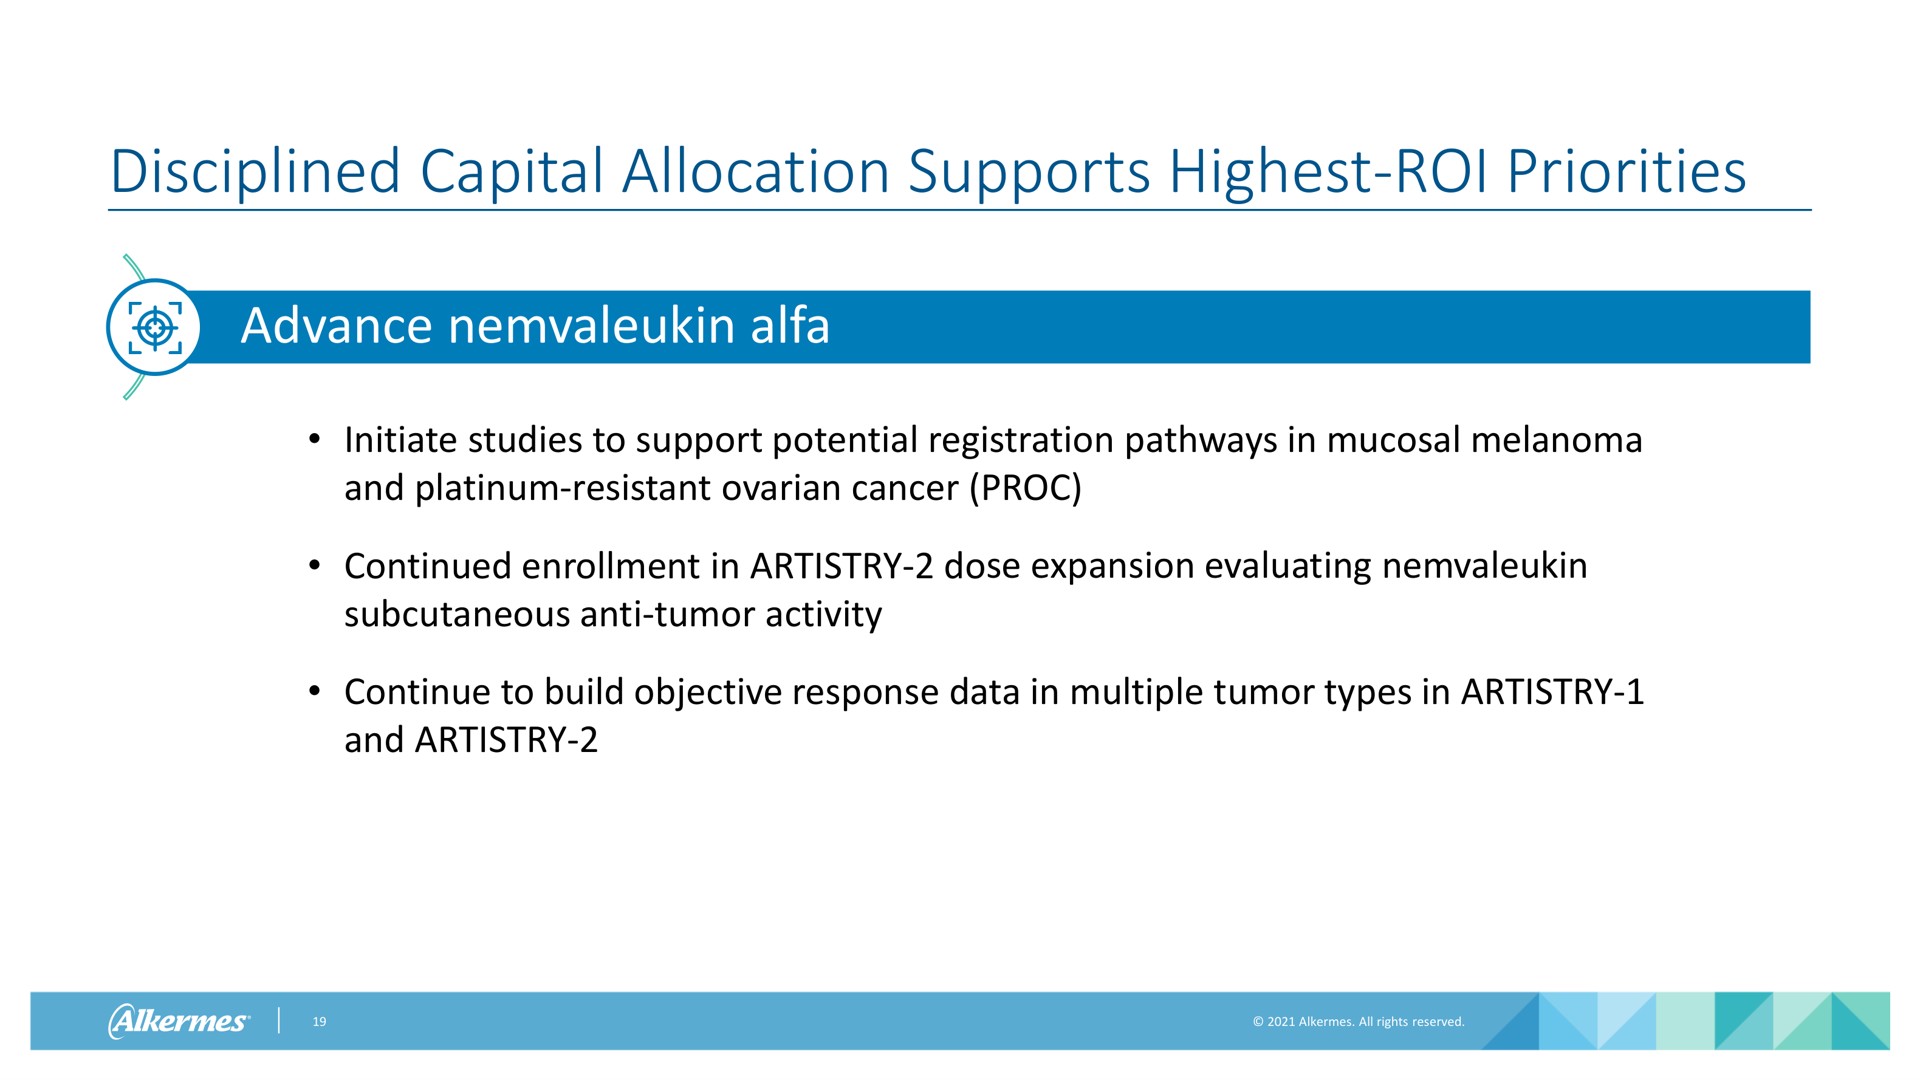 disciplined capital allocation supports highest roi priorities advance alfa initiate studies to support potential registration pathways in mucosal melanoma and platinum resistant ovarian cancer continued enrollment in artistry dose expansion evaluating subcutaneous anti tumor activity continue to build objective response data in multiple tumor types in artistry and artistry go | Alkermes